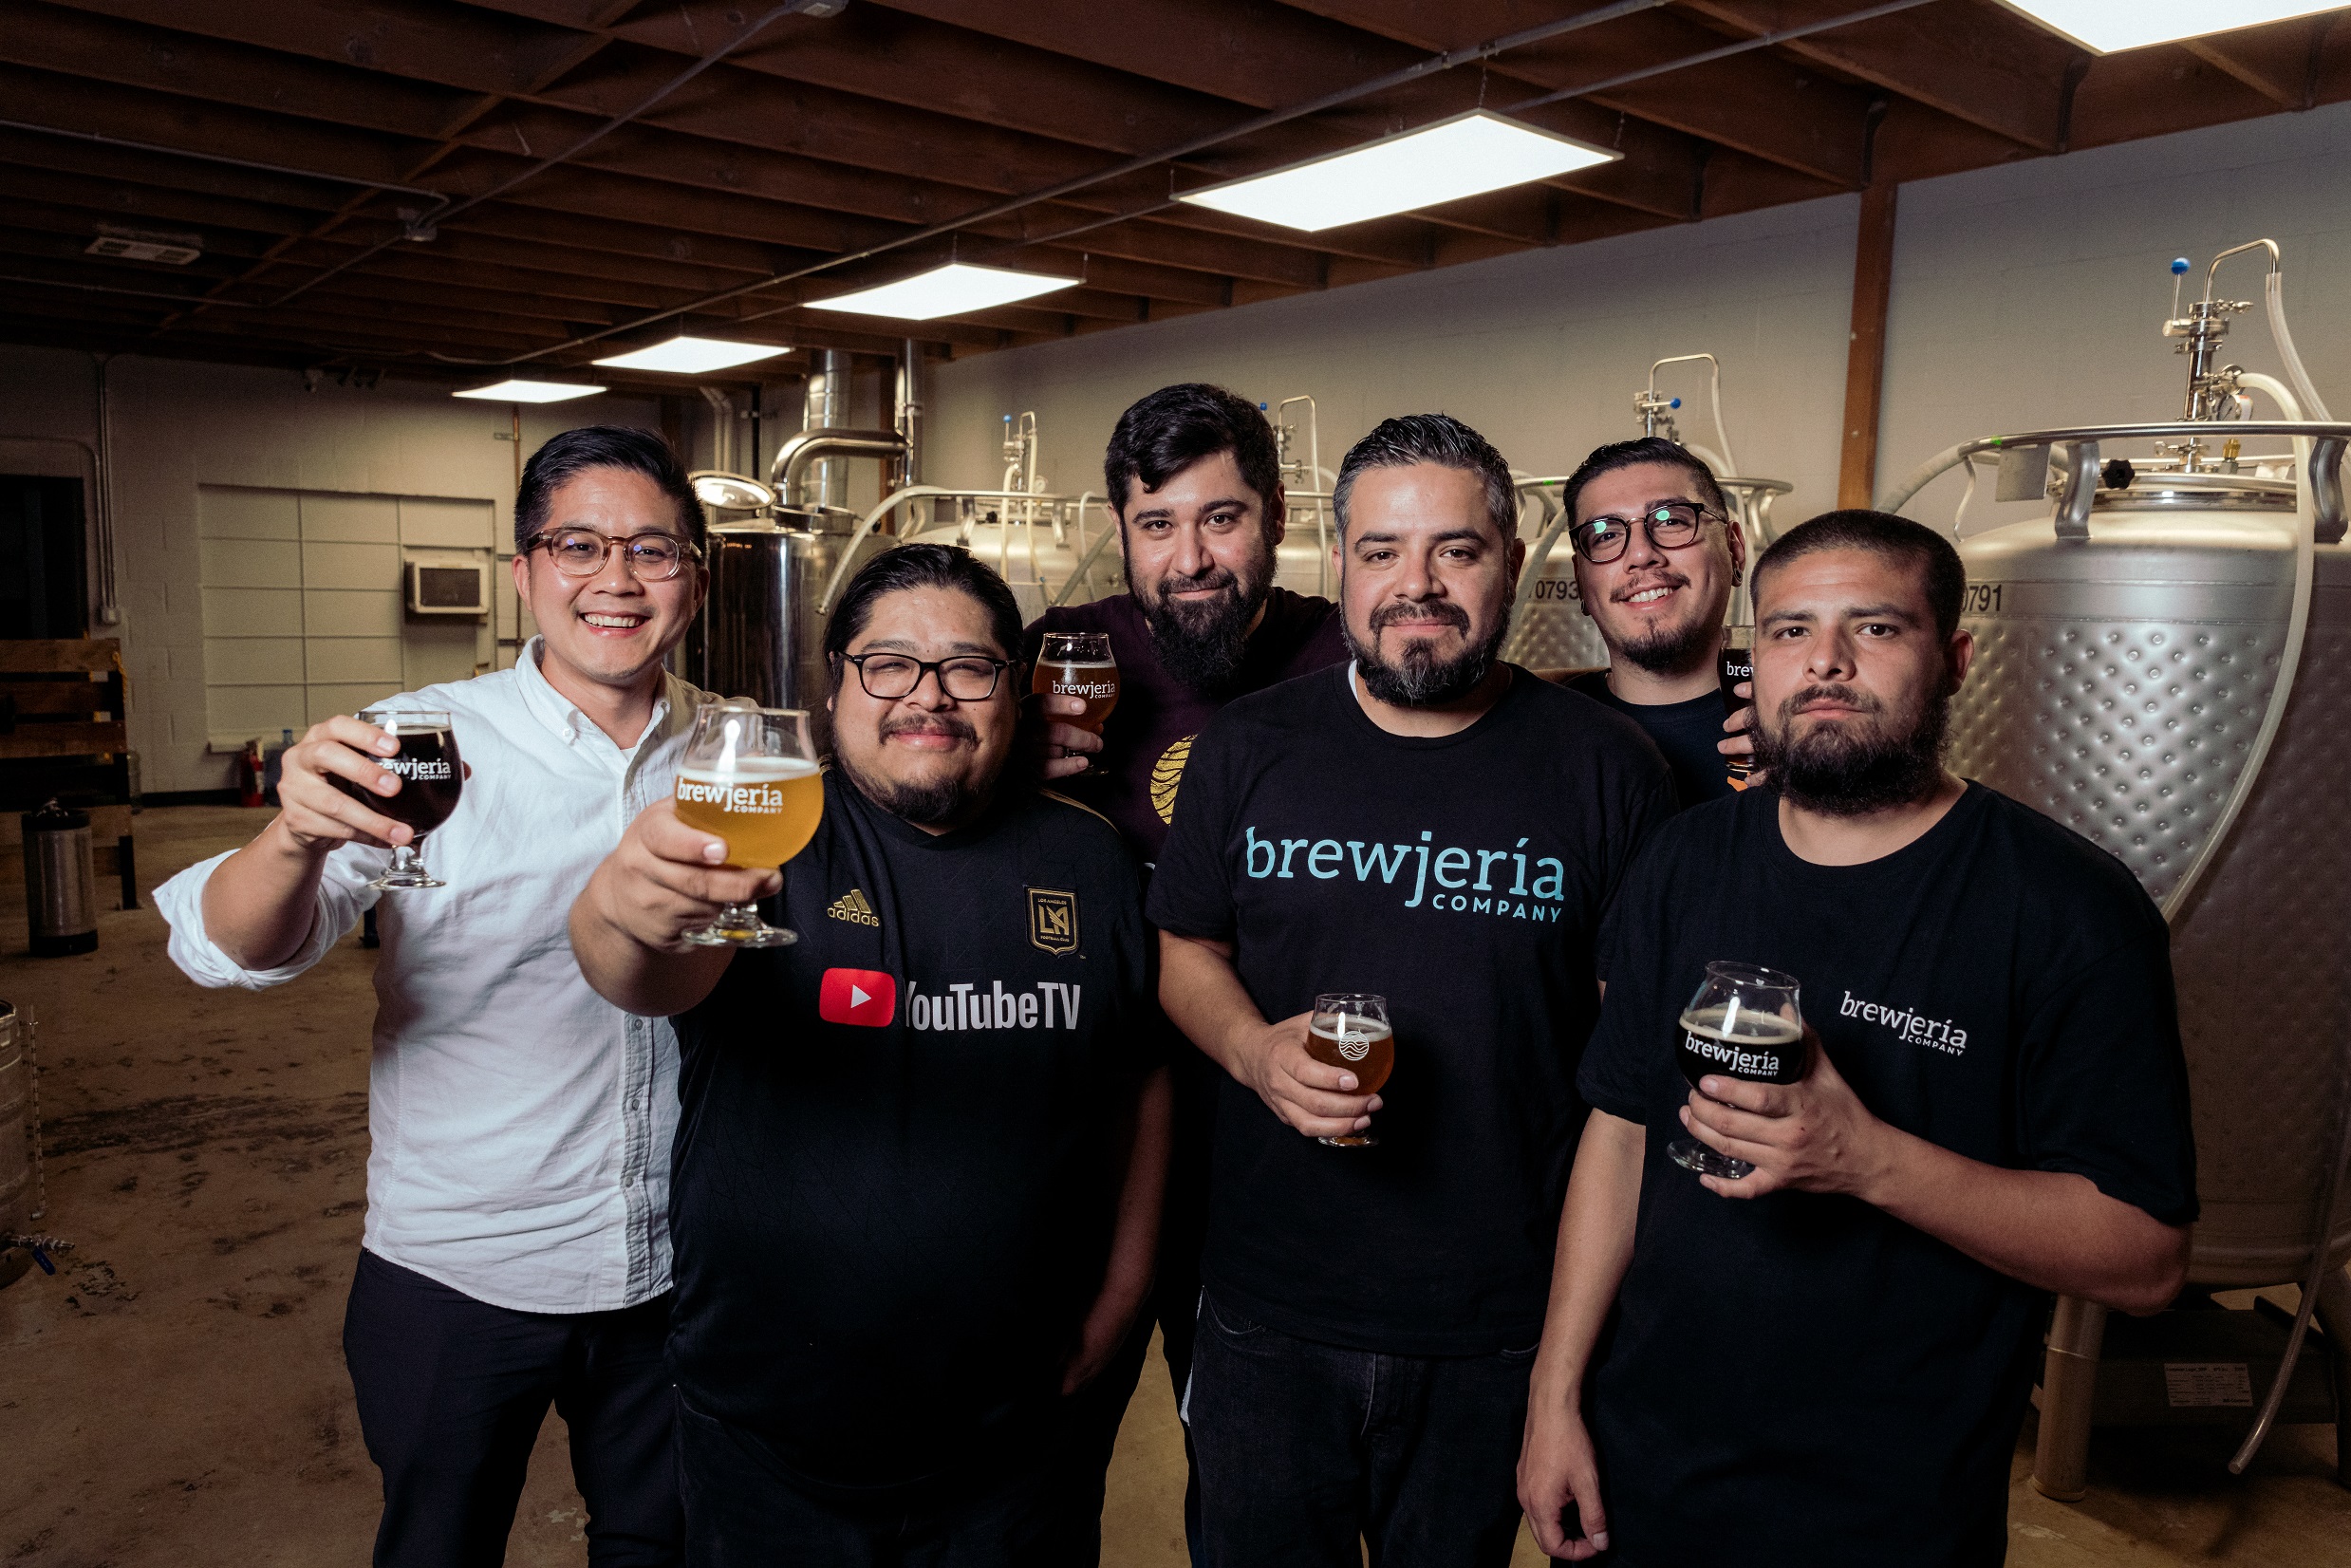 SoCal Cerveceros, America's Largest Latino-Based Homebrew Club, Is Making  Its Mark 